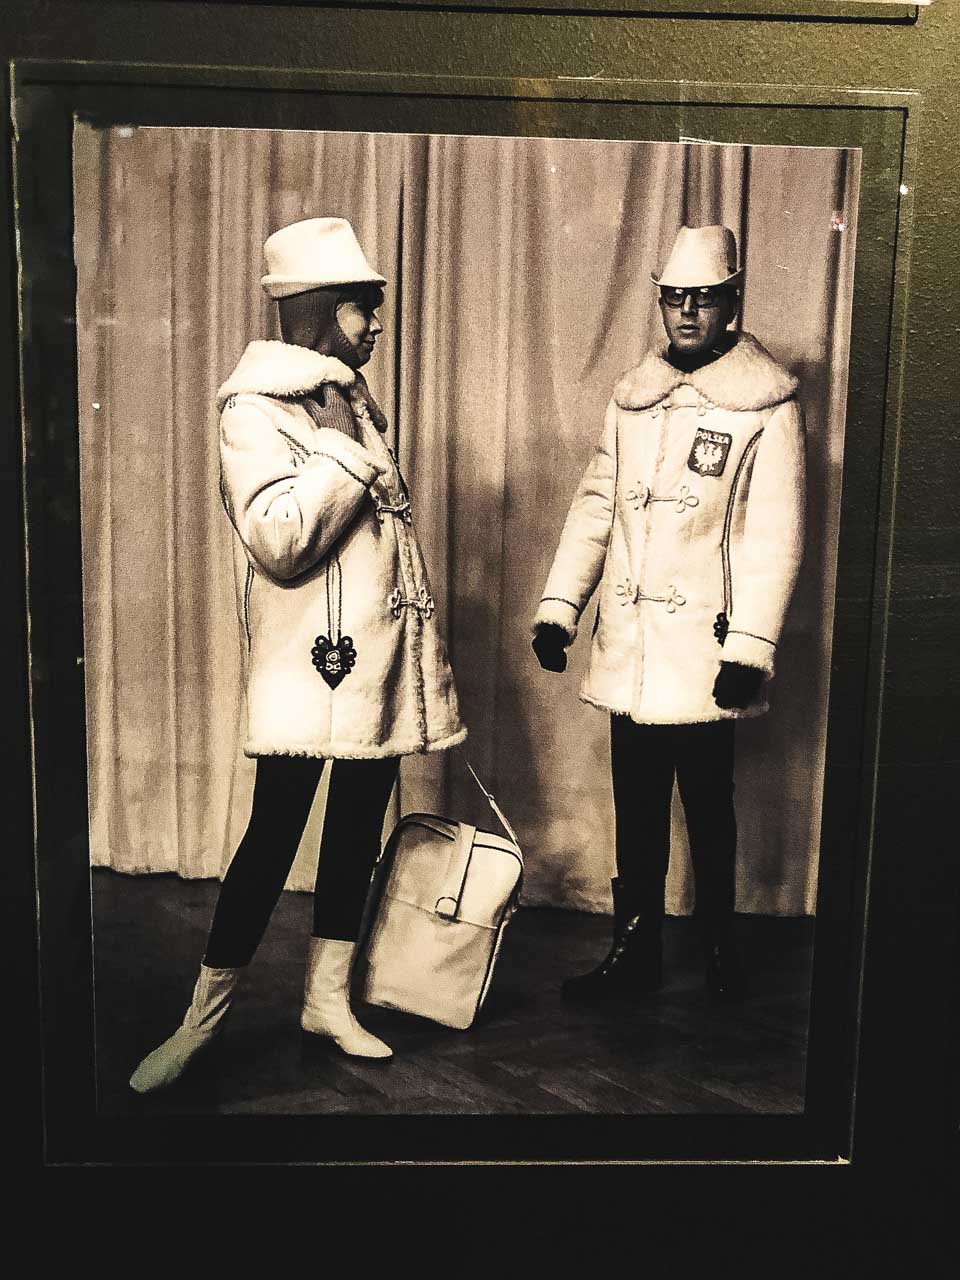 A photo of two people wearing clothes from the winter collection of Moda Polska on display at The Central Museum of Textiles in Łódź, Poland